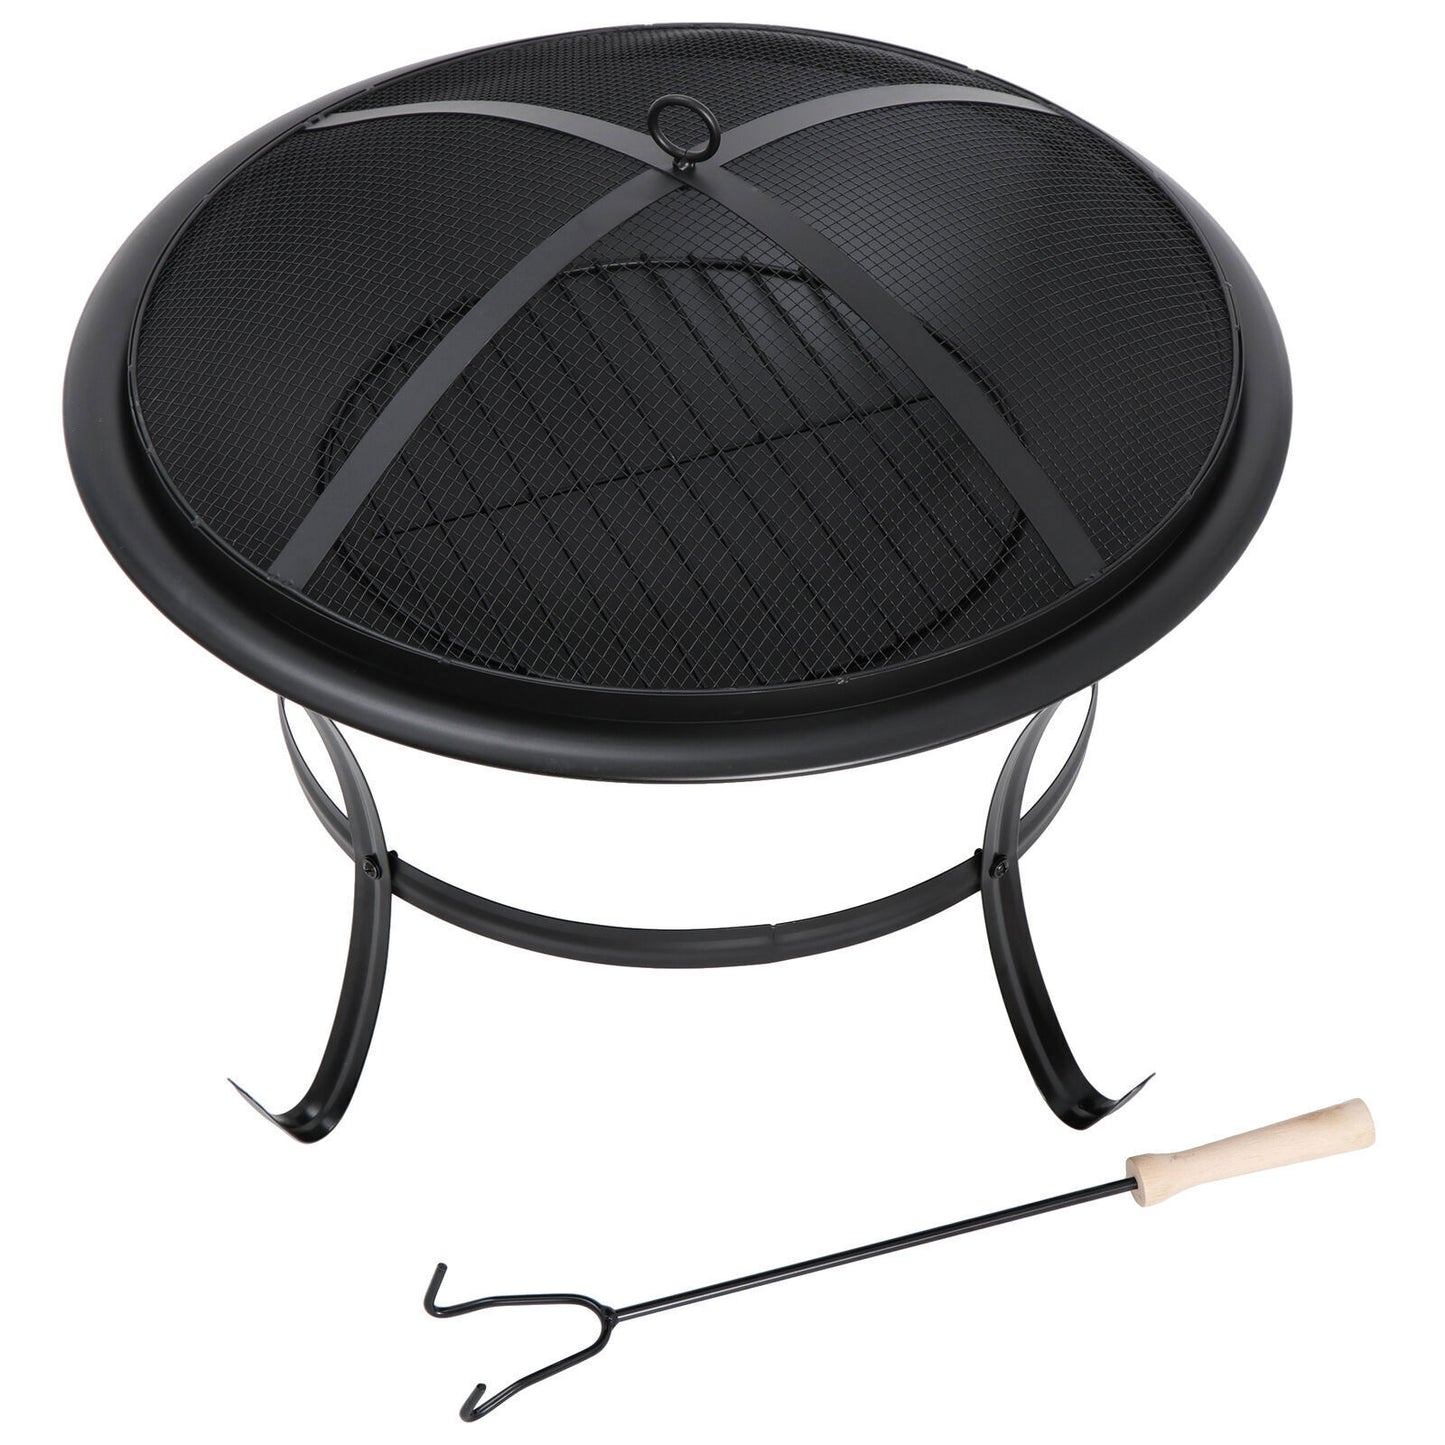 22" Round Fire Pit Patio Wood Burning Bowl Stove Fireplace W/ Lid Poker Black